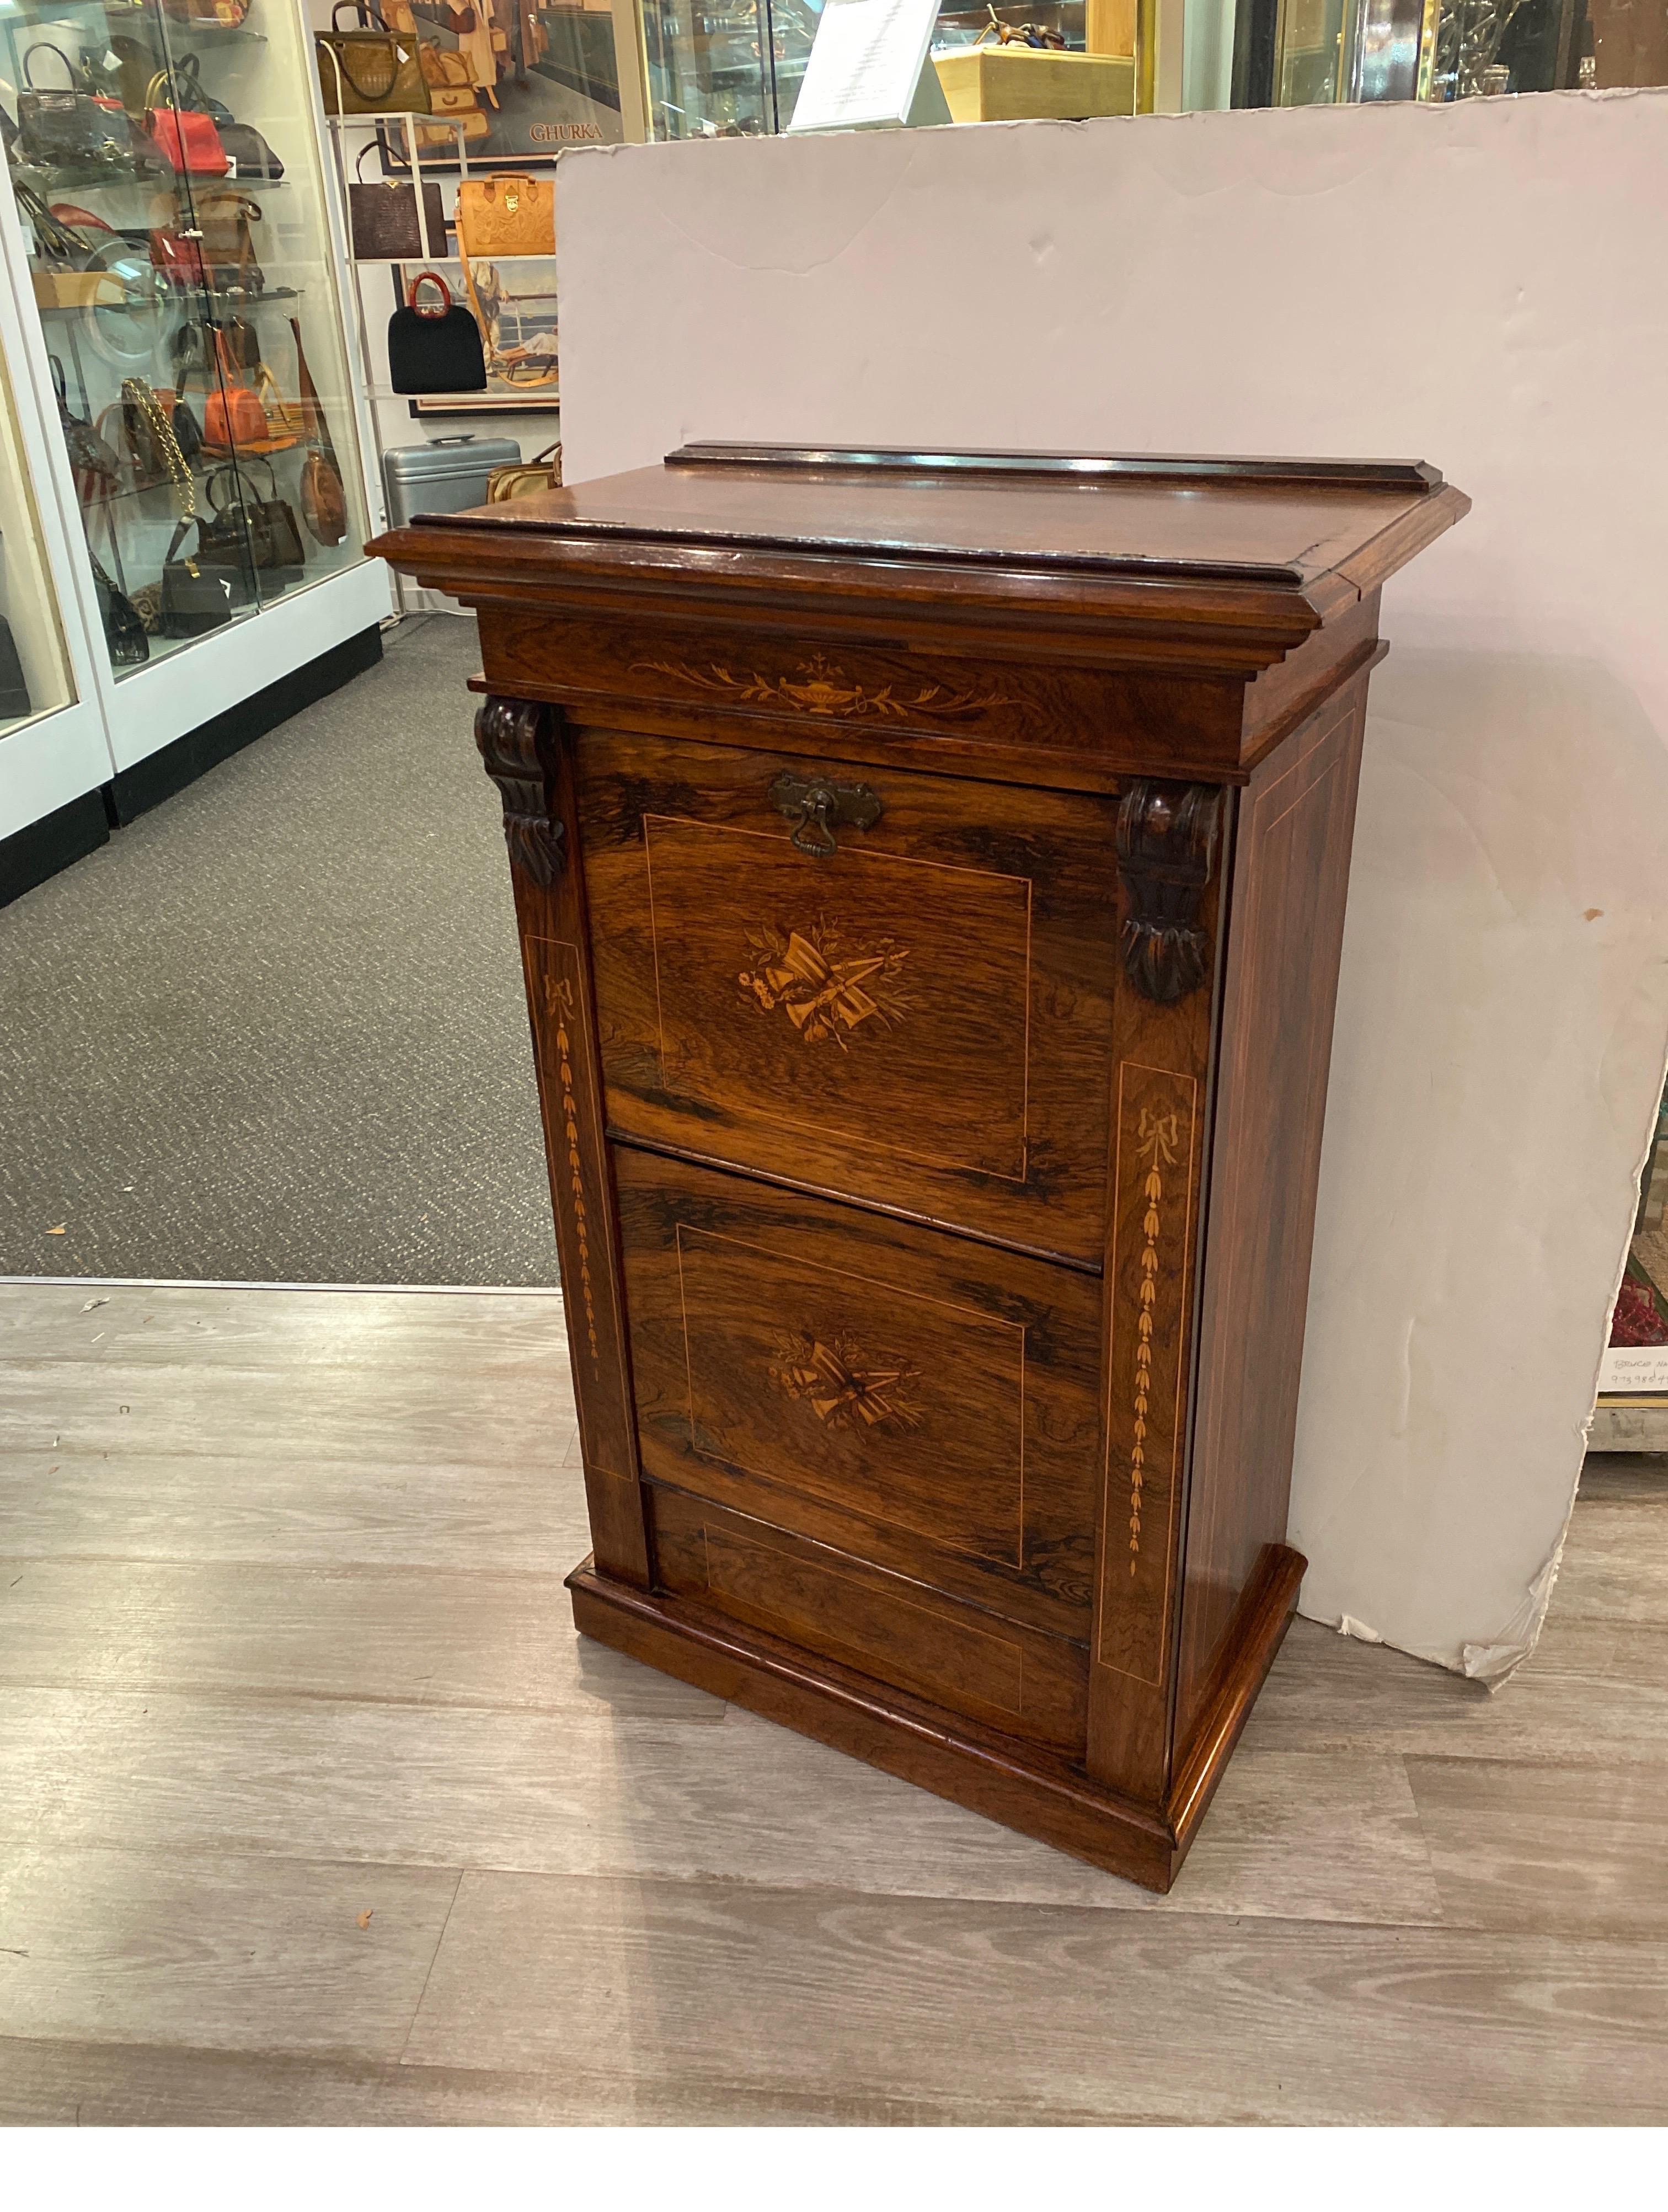 Sunning rosewood music cabinet with inlay of satinwood. The top with a lift up lectern shelf, the base with two doors that fall open to hold music, magazines or reading material. Elegant grained rosewood with carved top pilasters on each side and